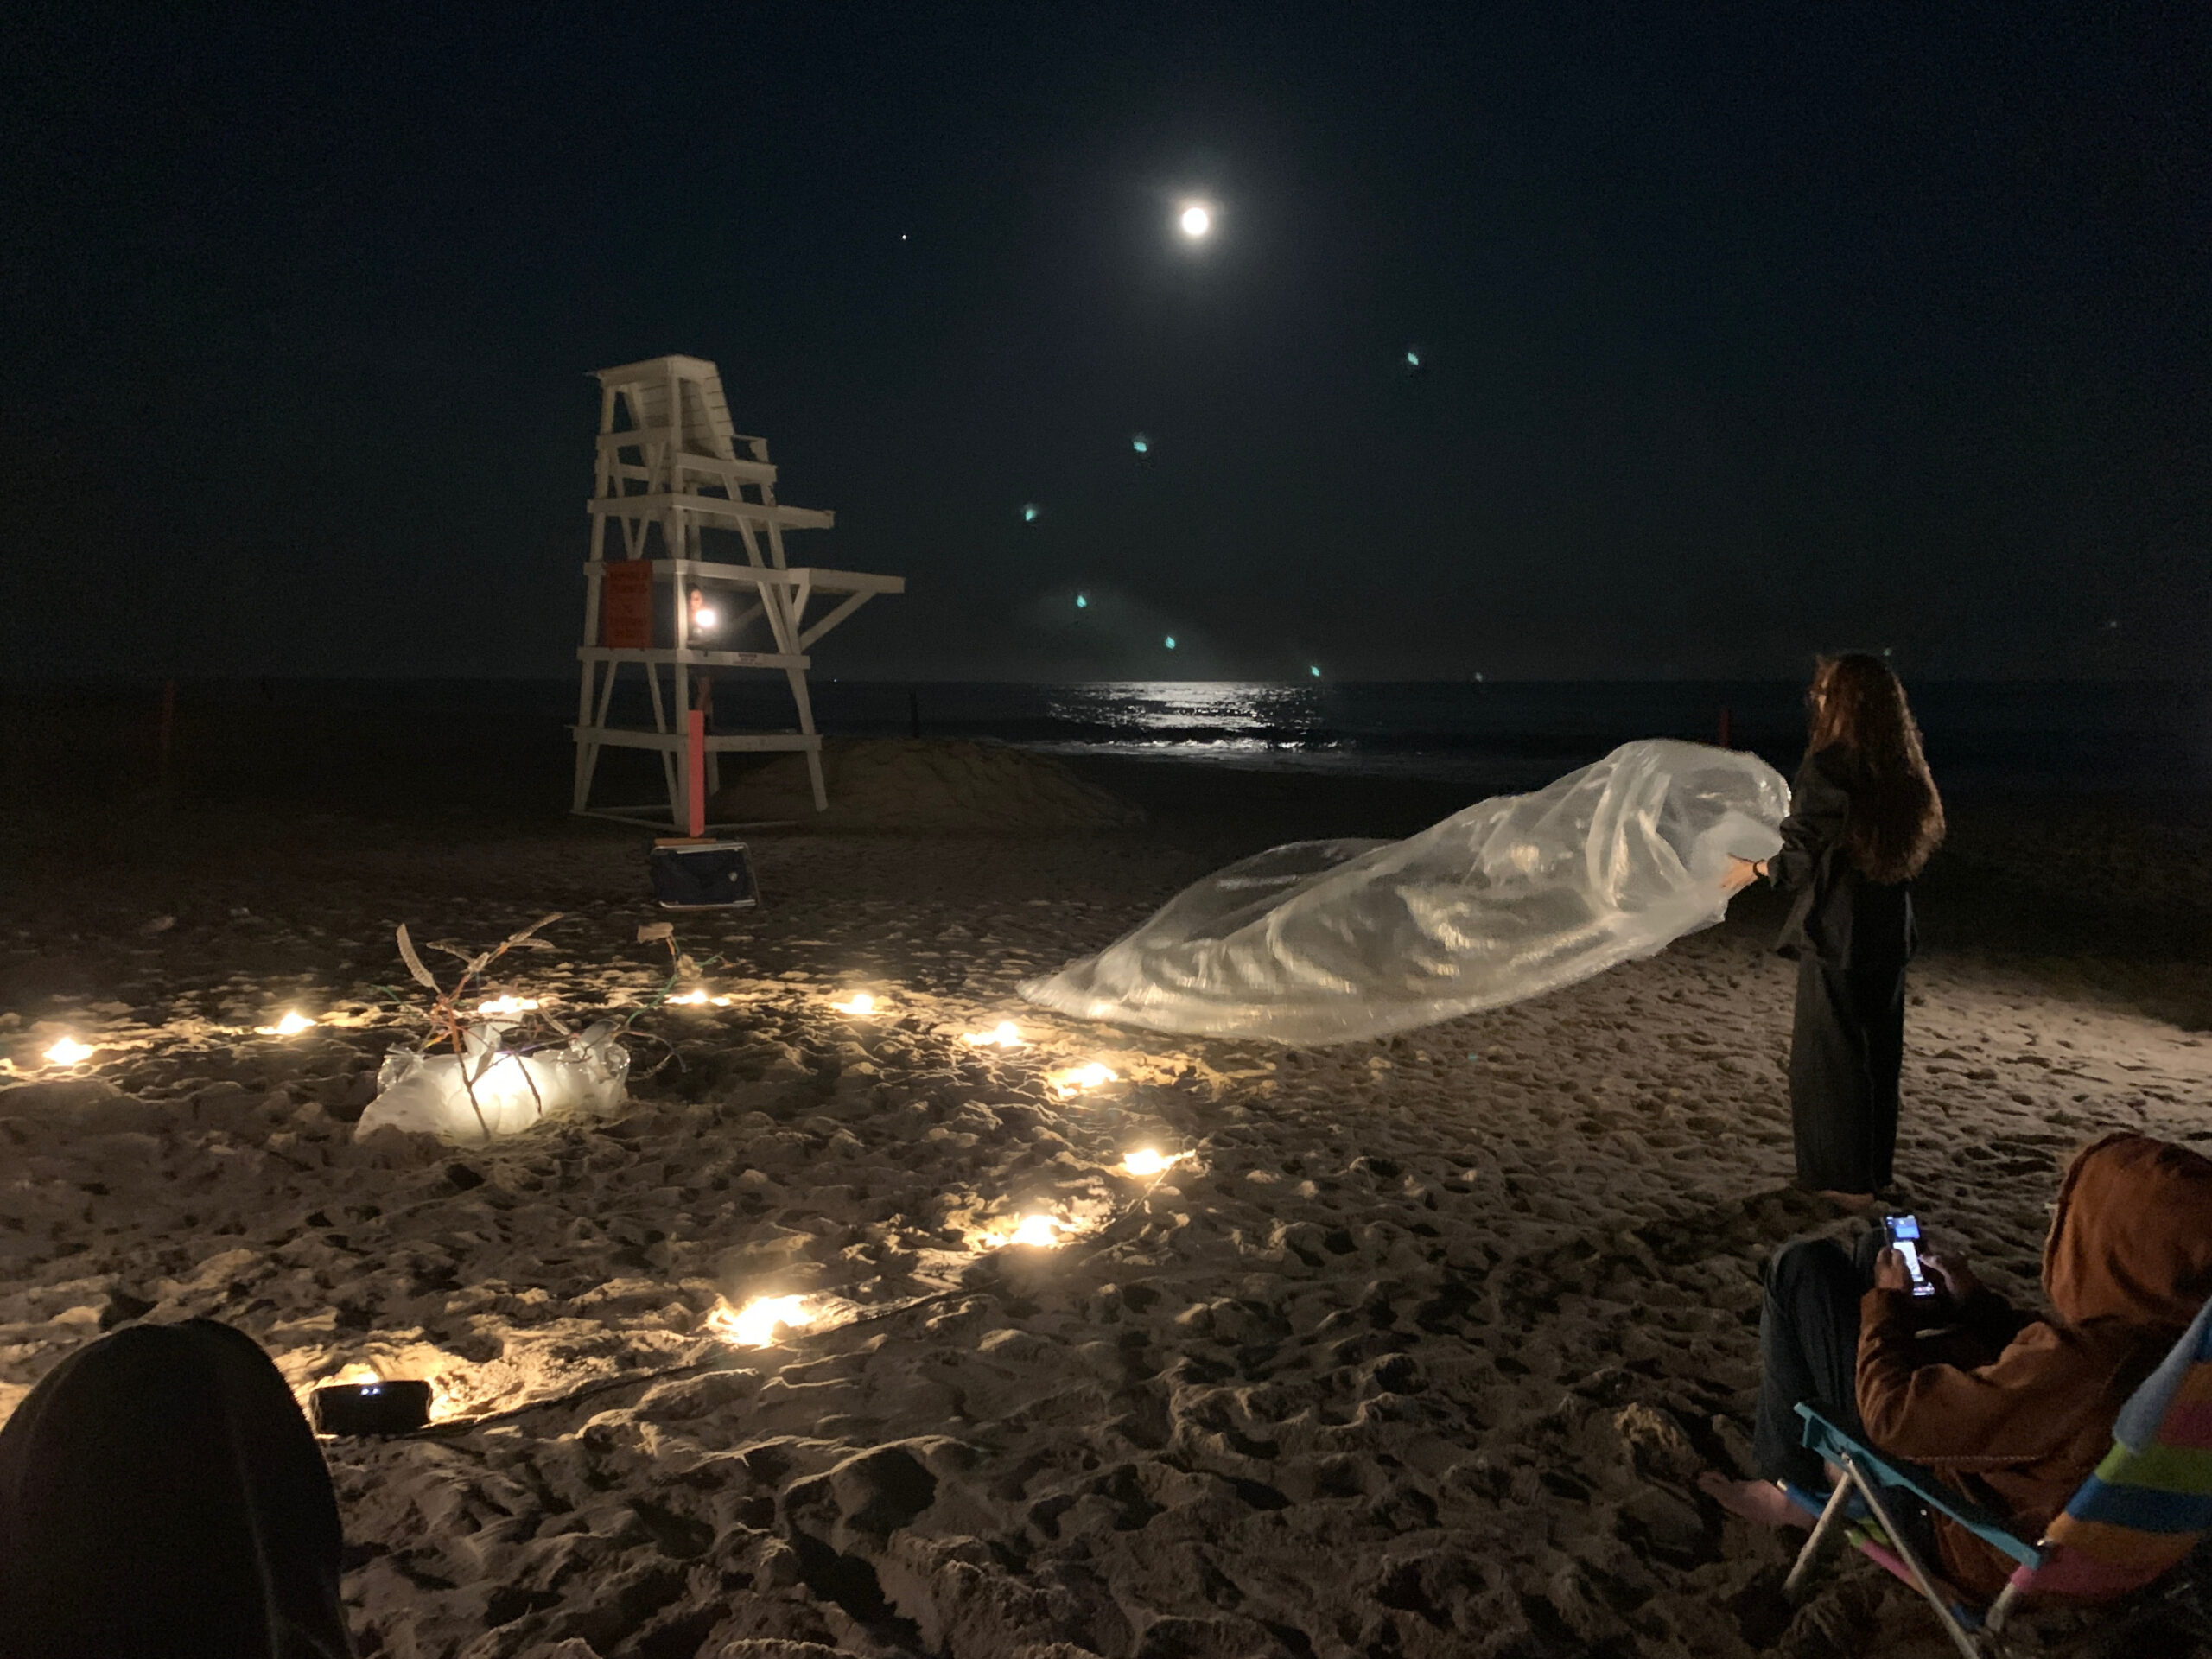 Artist Elana Bajo performing an art piece under the full moon at East Hampton's Main Beach on September 10 in response to a musical love letter from West Coast artist Jasmine Orpilla. ANNETTE HINKLE